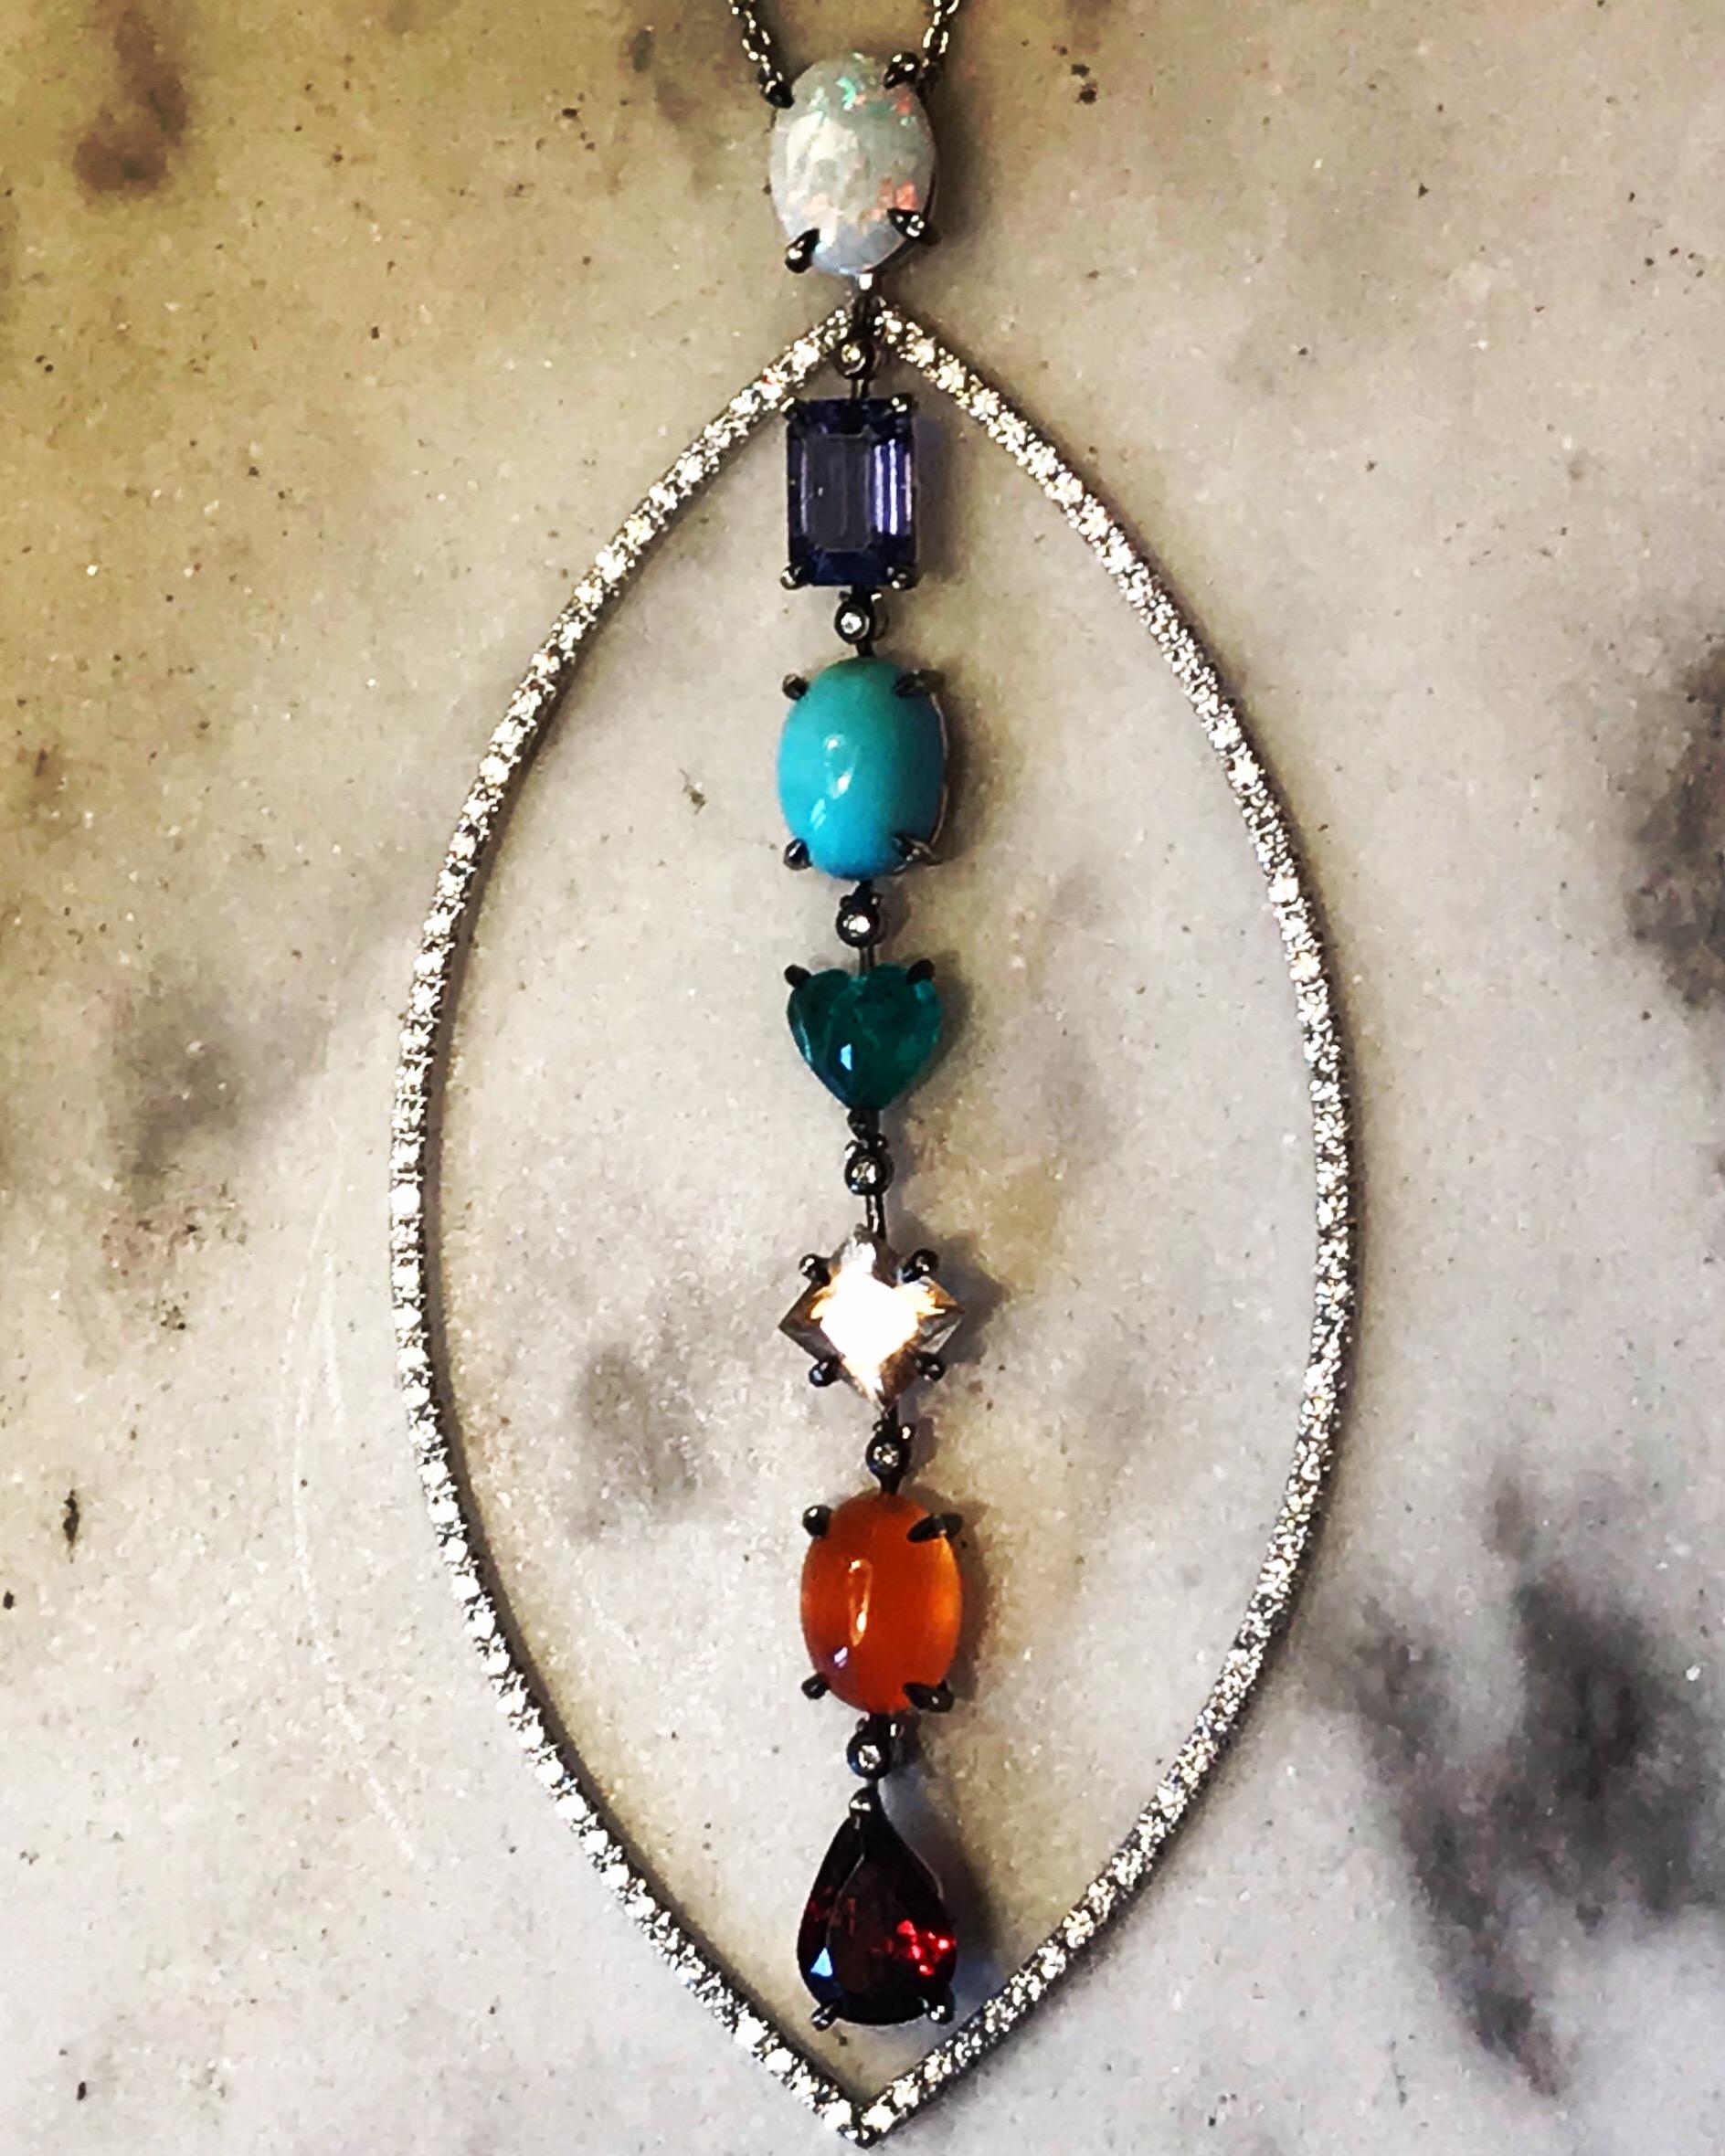 AURA : A white gold, diamonds and colored stones Chakra pendant by Frederique Berman.
This design symbolizes the perfect alignment of the seven main chakras, when open and blooming, so the circulating energy  creates a shining halo around the